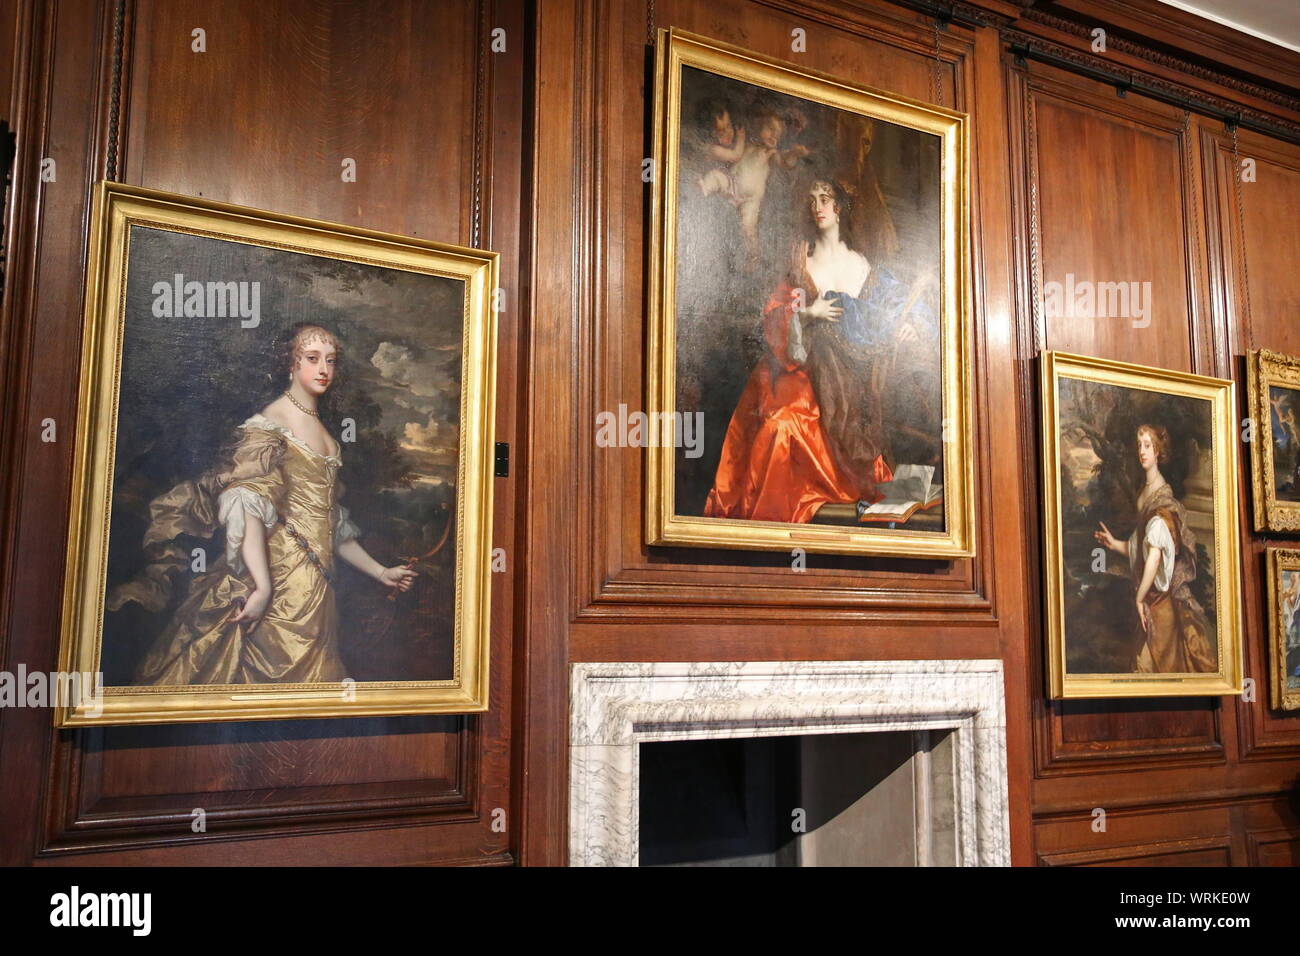 'Windsor Beauties' by Sir Peter Lely, Communication Gallery, Hampton Court Palace, East Molesey, Surrey, England, Great Britain, UK, Europe Stock Photo